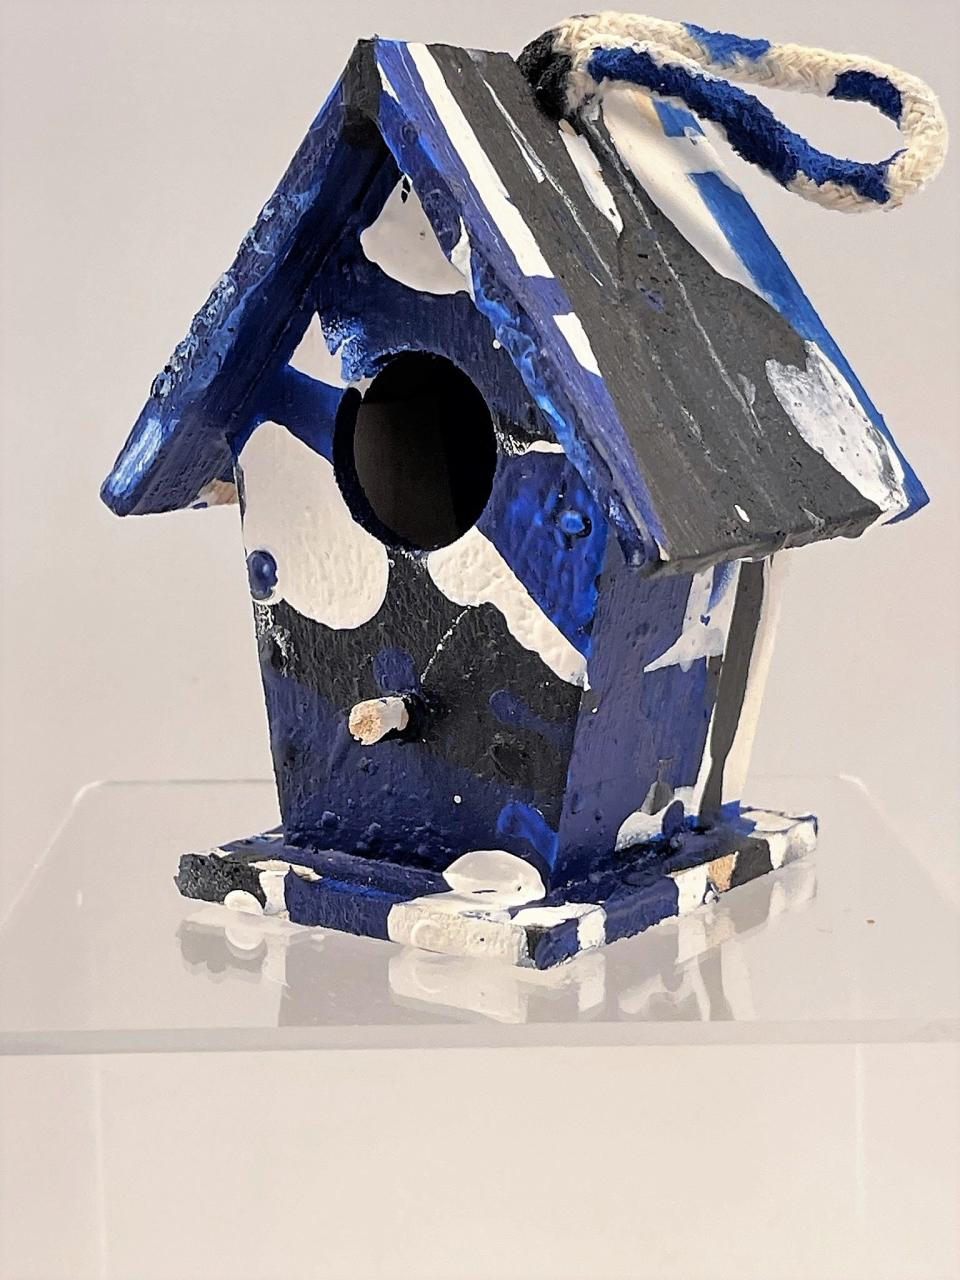 To celebrate Pride month and National Coming Out Day on Oct. 11, Location Gallery asked LGBTQIA+ artists from Savannah to contribute birdhouses to their Love Shax exhibition. This birdhouse was designed by Calvin Woodum.